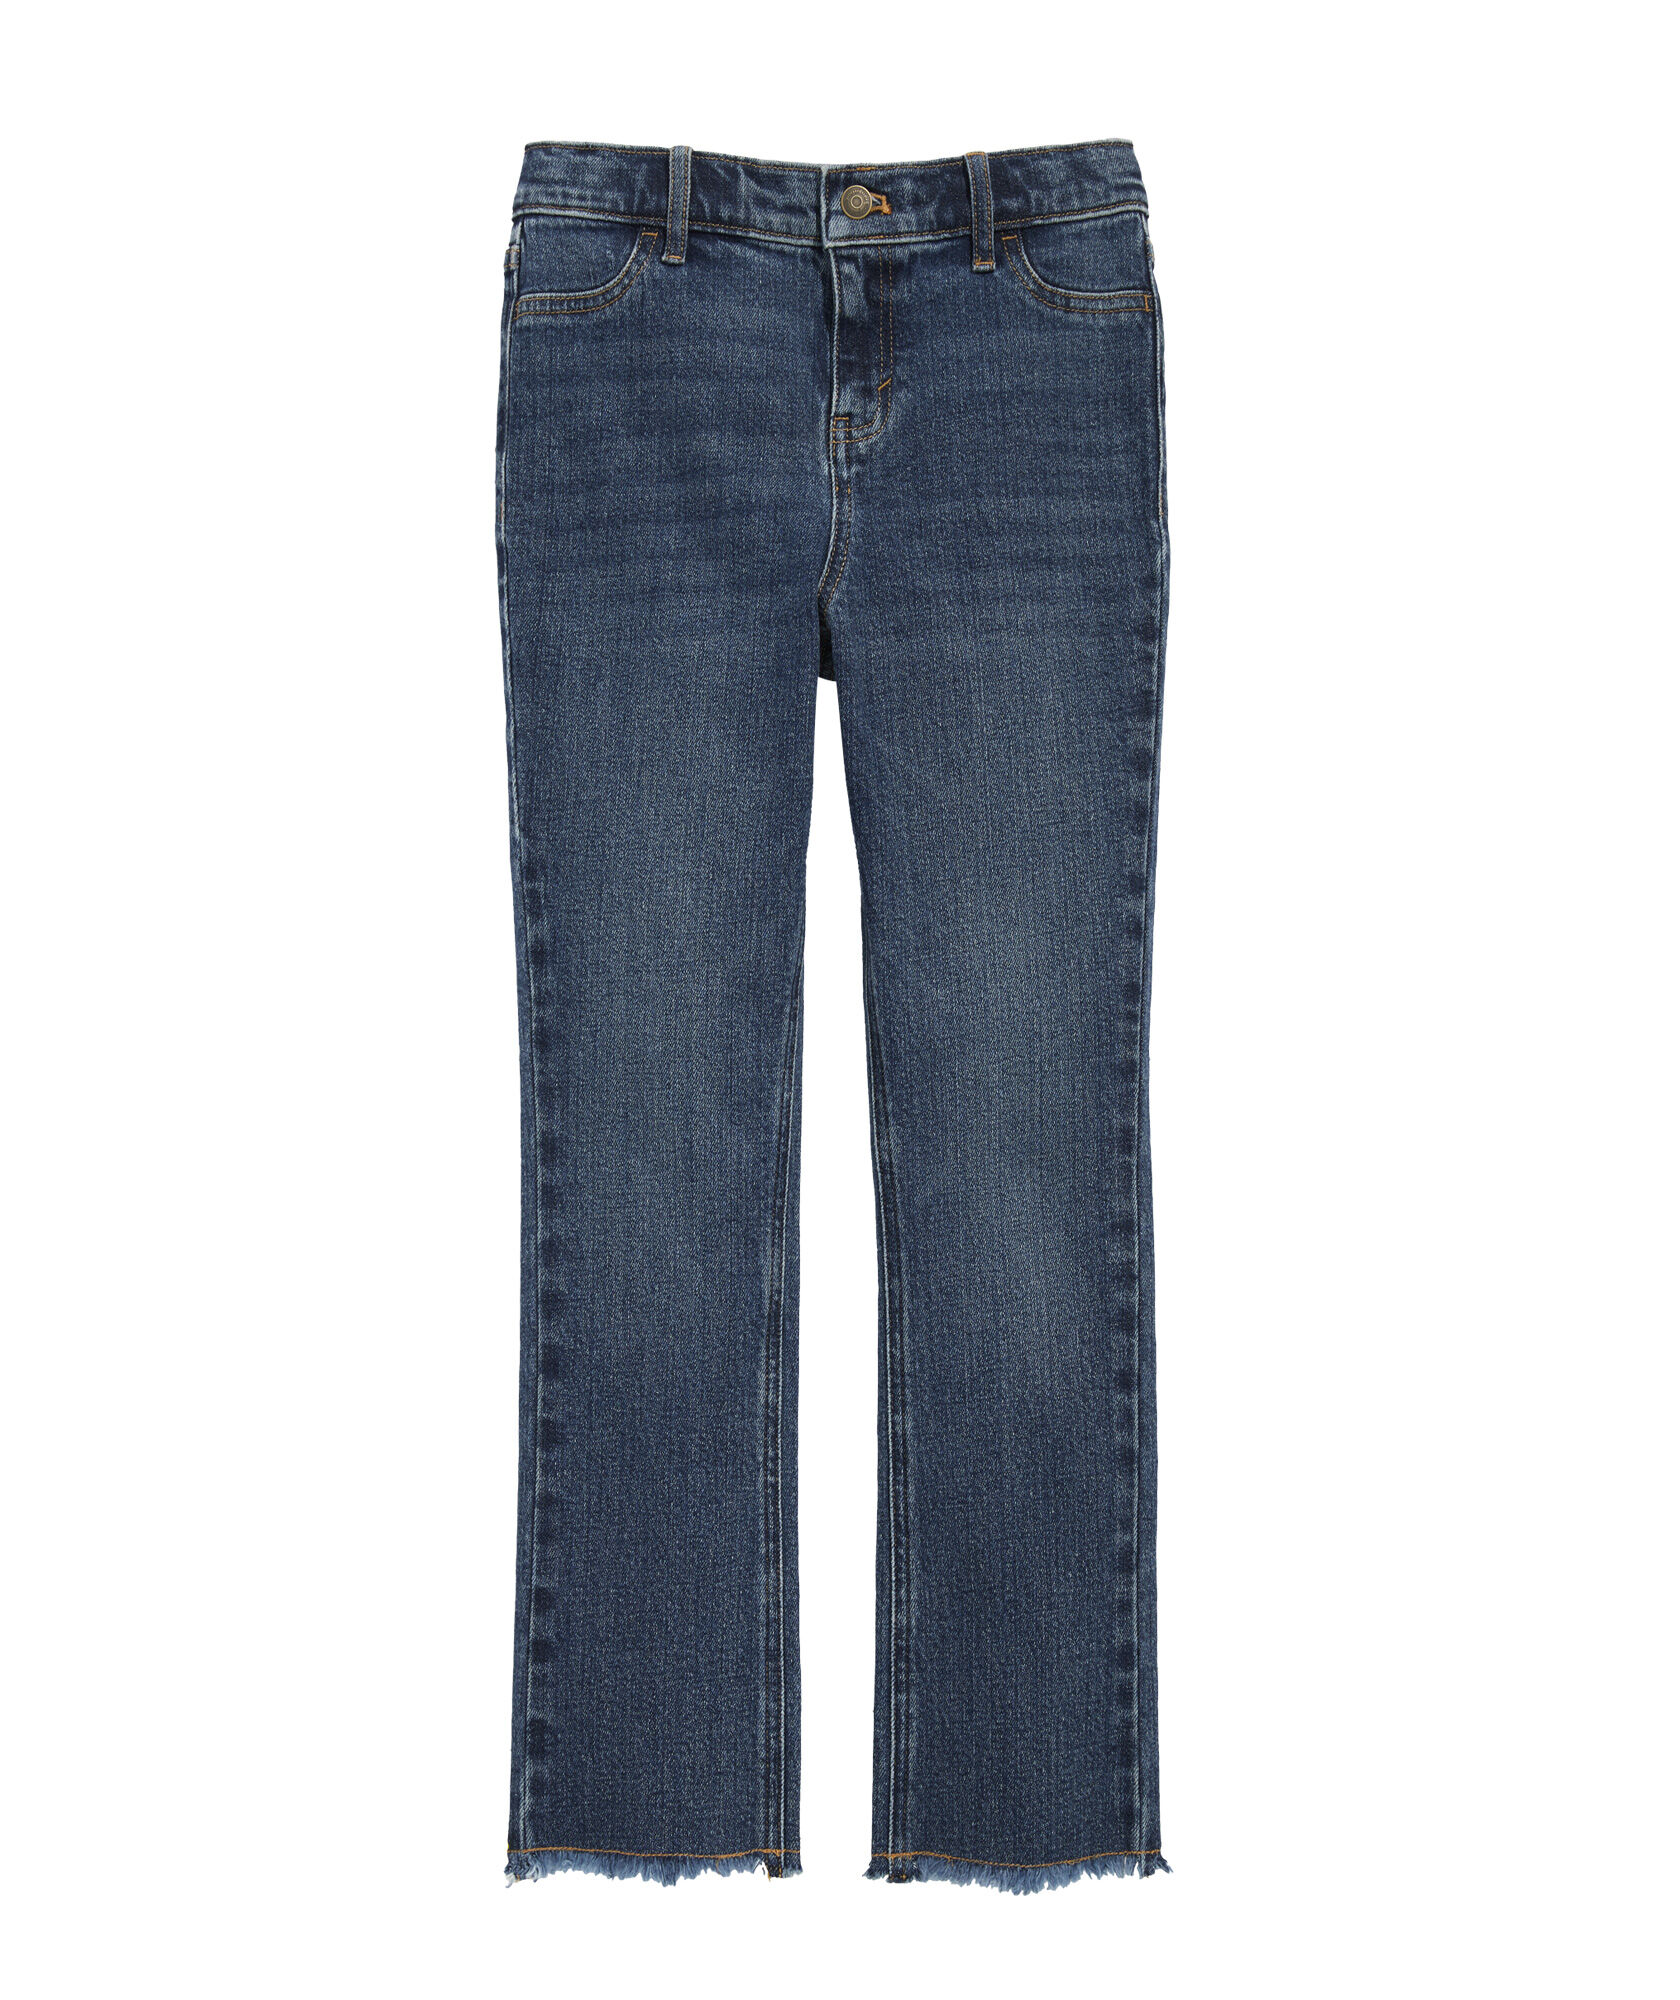 OUTLET Girls' Kick Flare Jeans